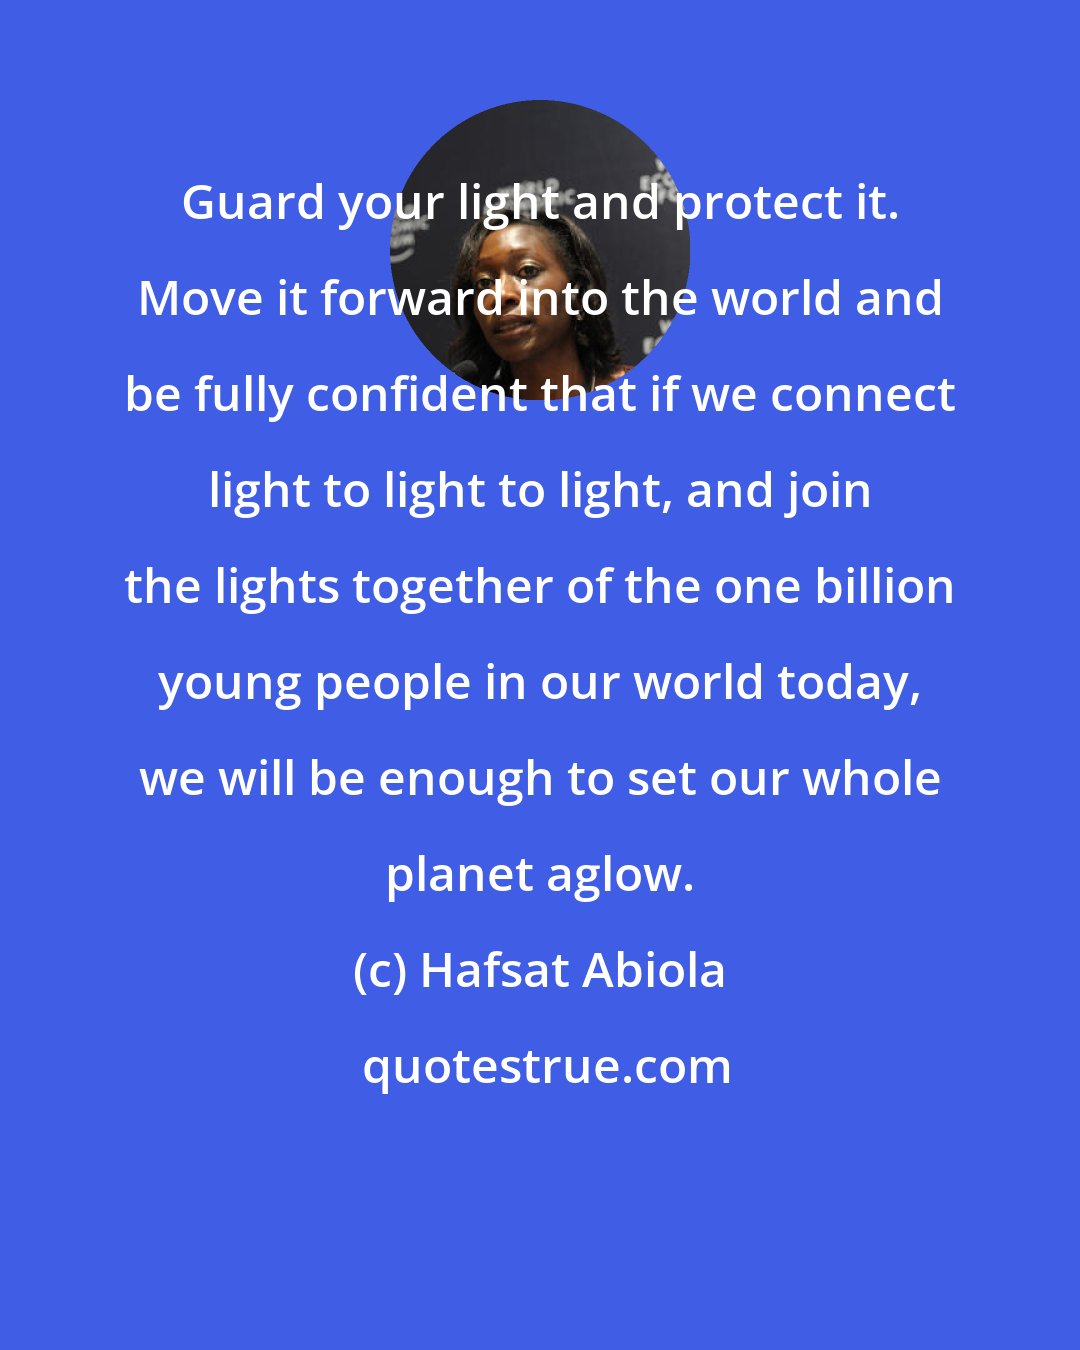 Hafsat Abiola: Guard your light and protect it. Move it forward into the world and be fully confident that if we connect light to light to light, and join the lights together of the one billion young people in our world today, we will be enough to set our whole planet aglow.